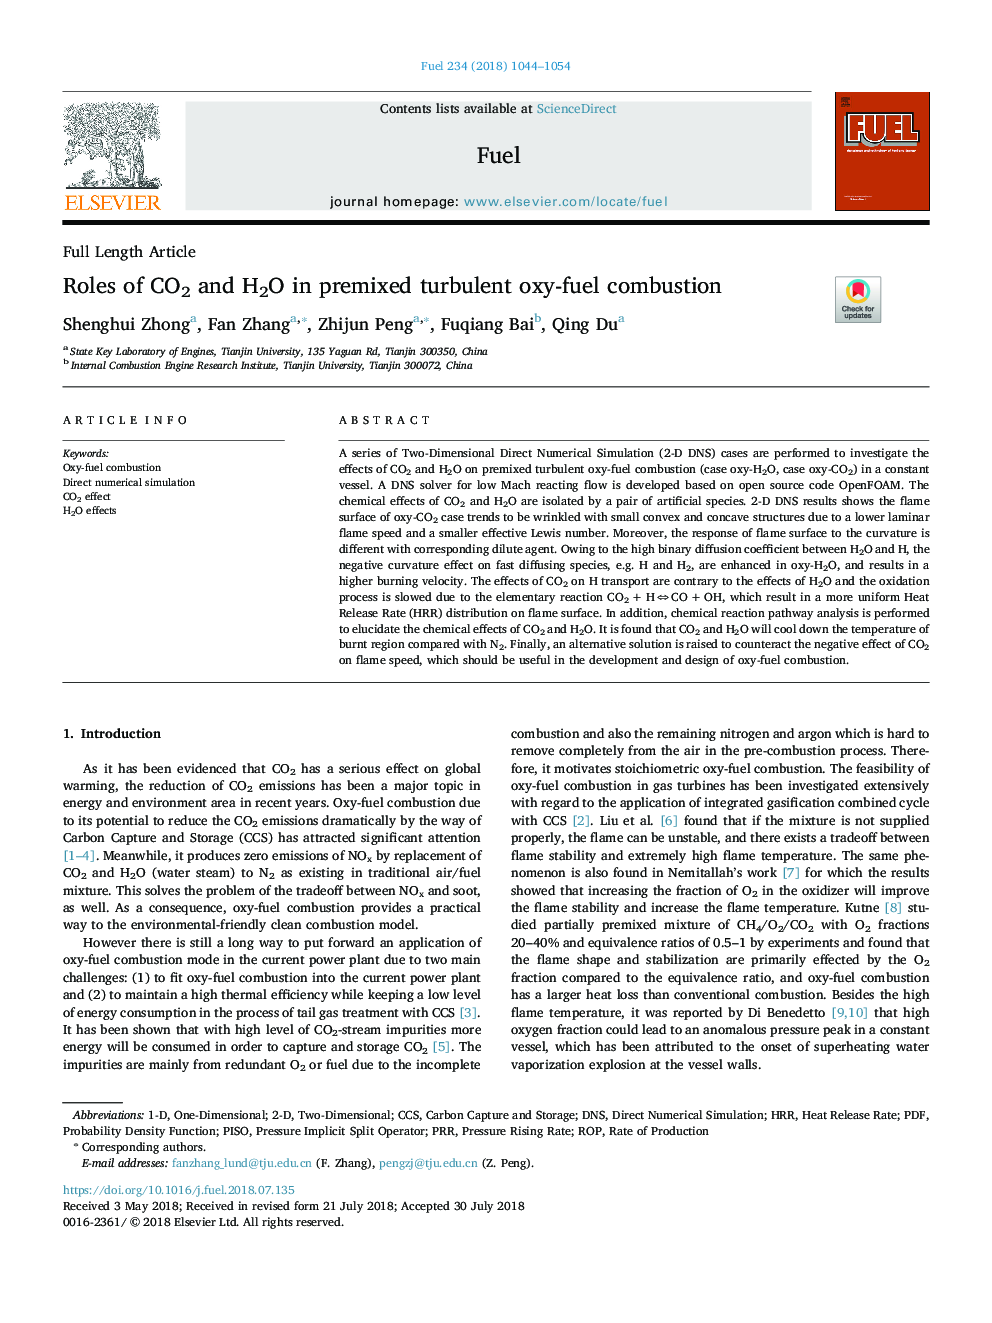 Roles of CO2 and H2O in premixed turbulent oxy-fuel combustion